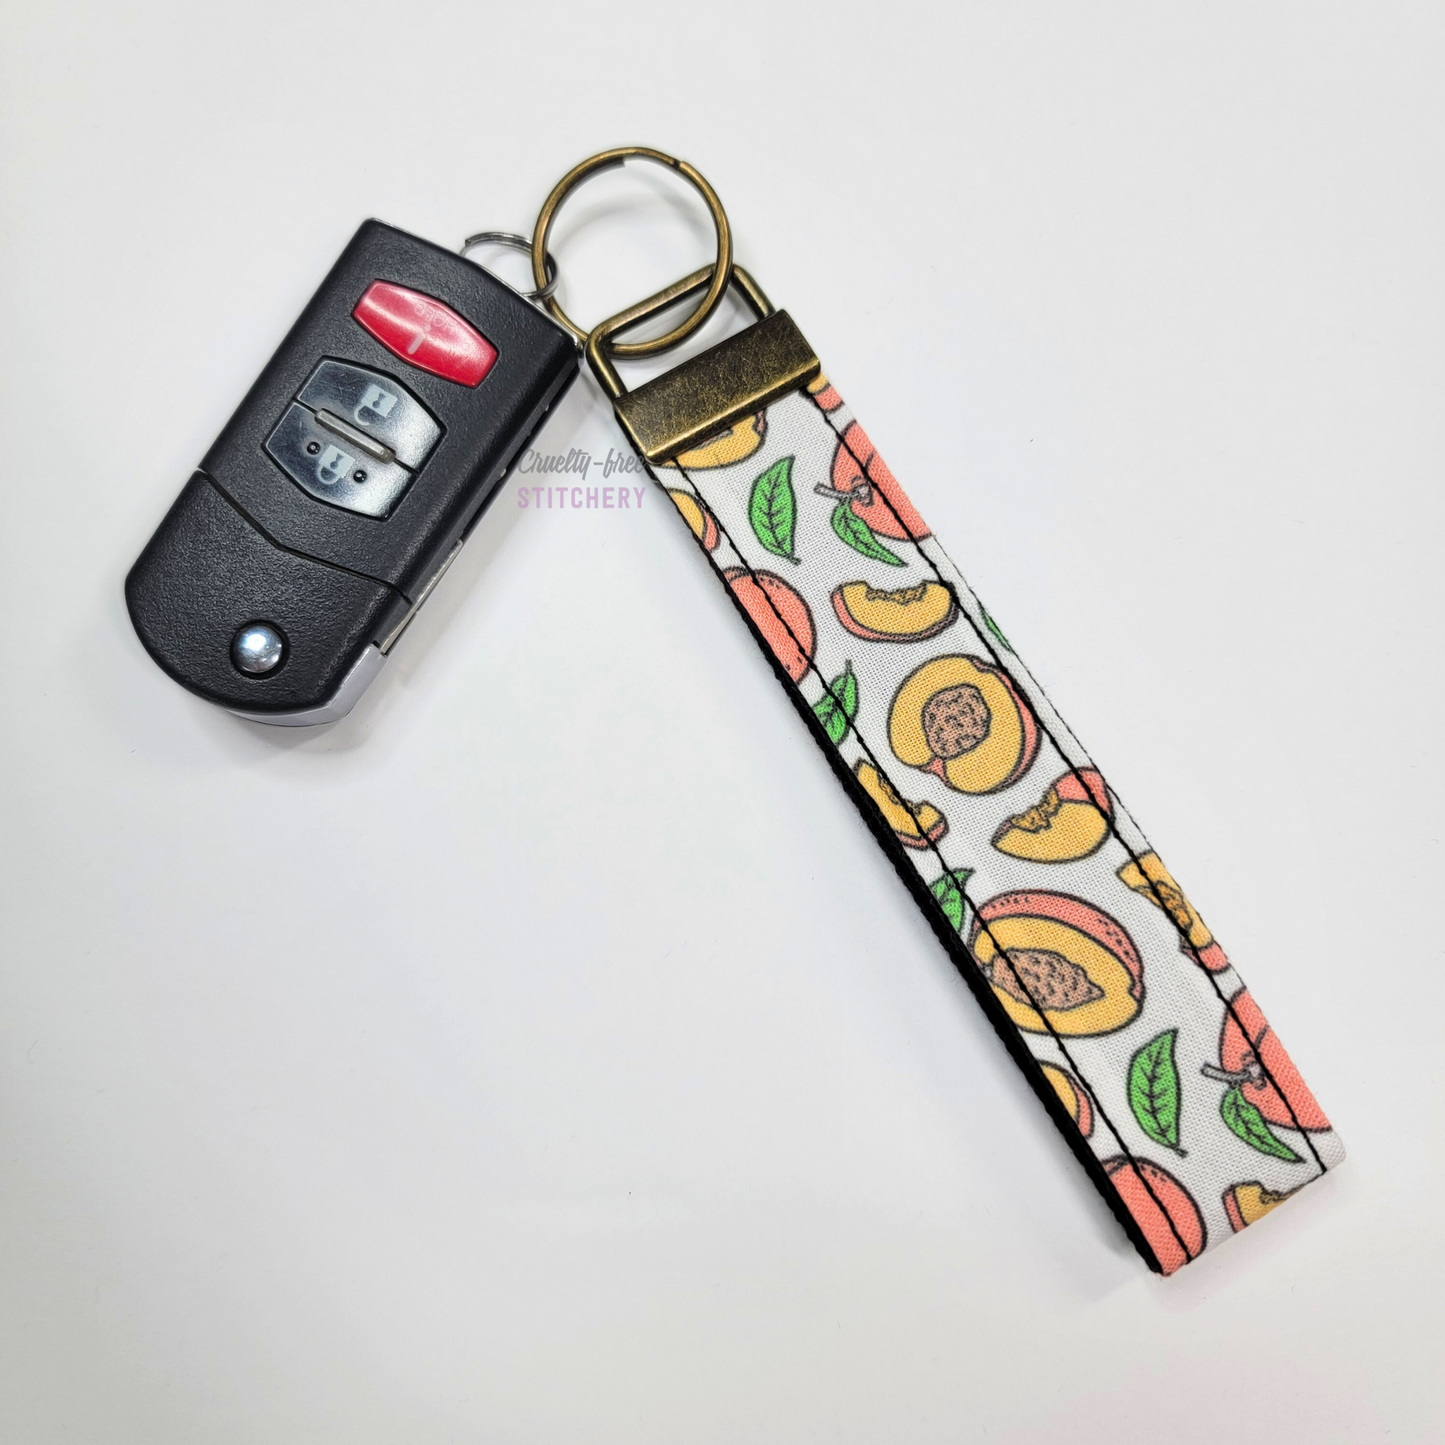 Peaches print key fob wristlet attached to a car key for scale. The car key is the fold-away type and is about half as long as the strap.